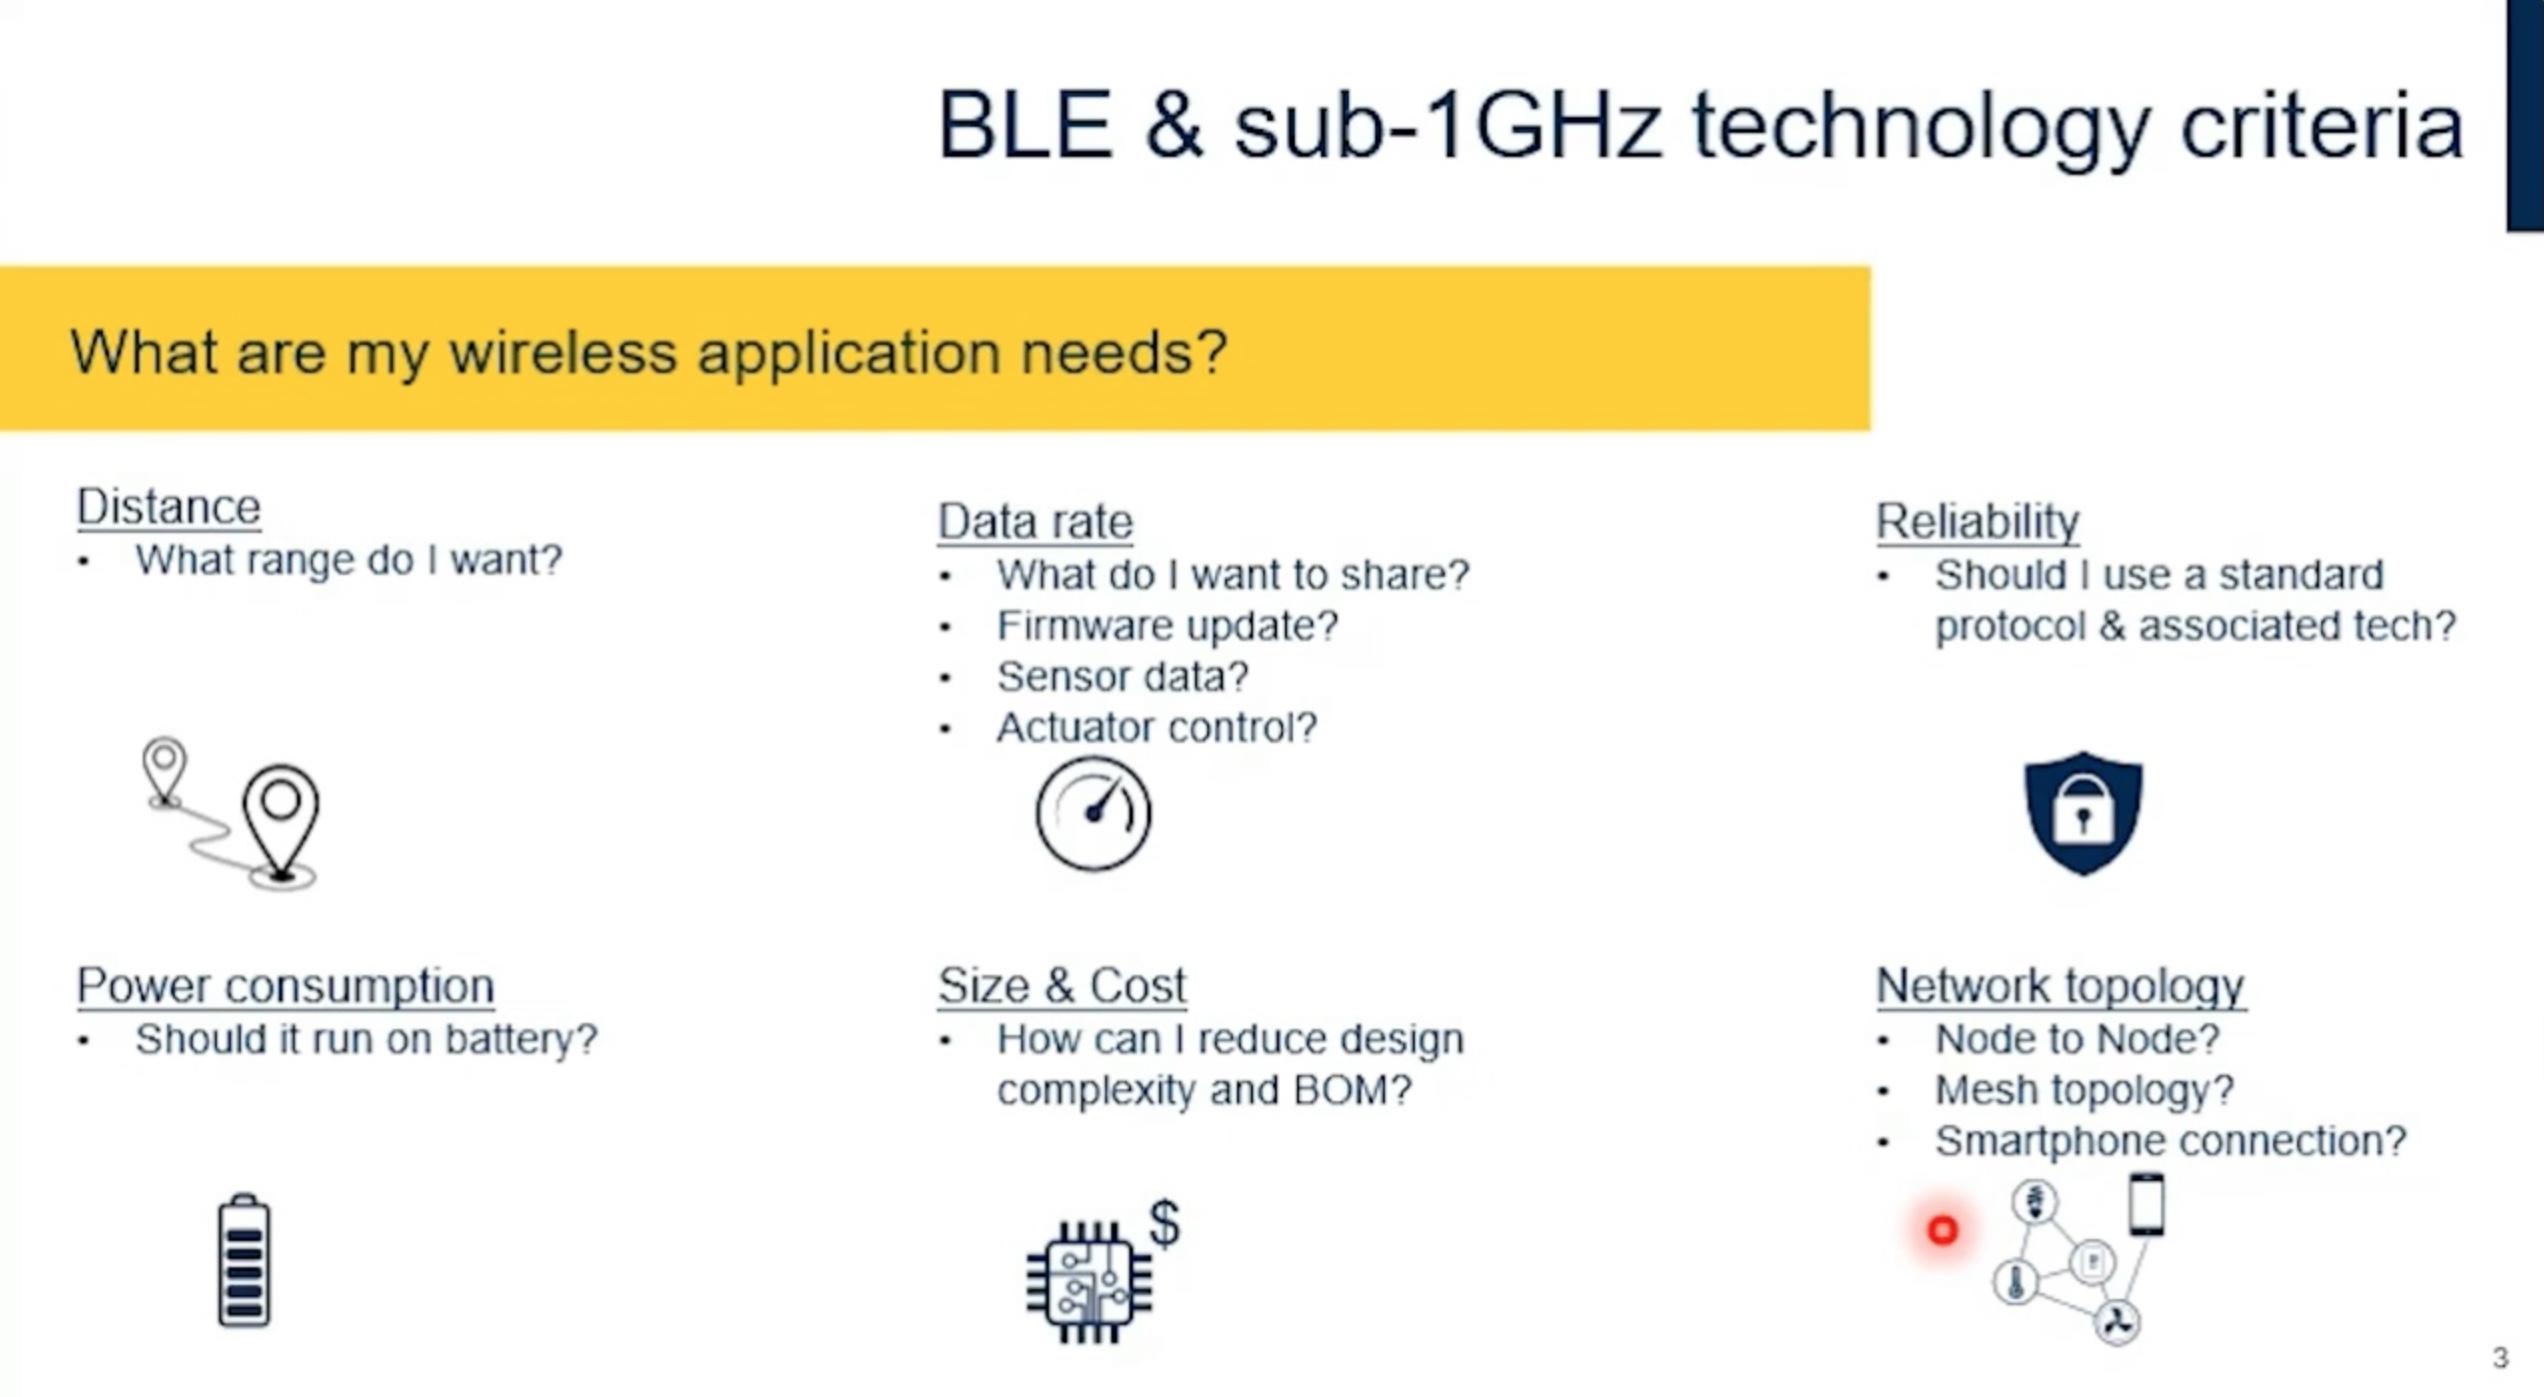 BLE vs. sub-1GHz, the six fundamental factors and the inherent questions they raise